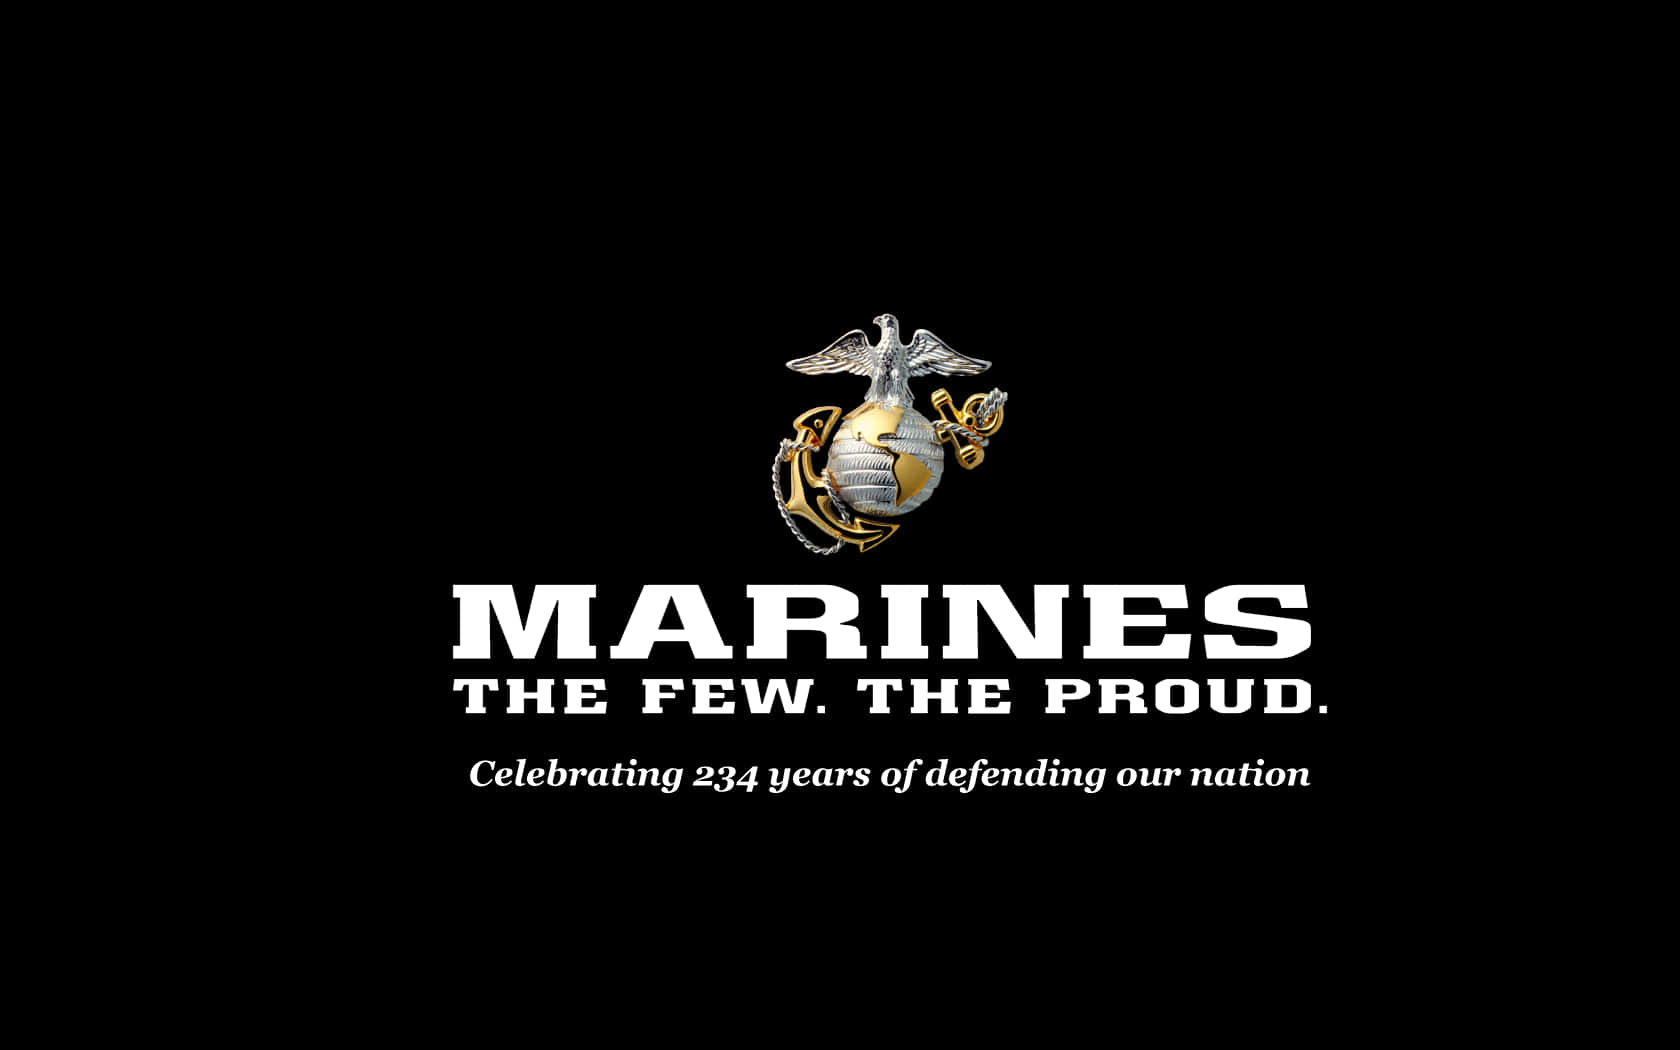 The United States Marine Corps- Duty, Honor, Country Wallpaper